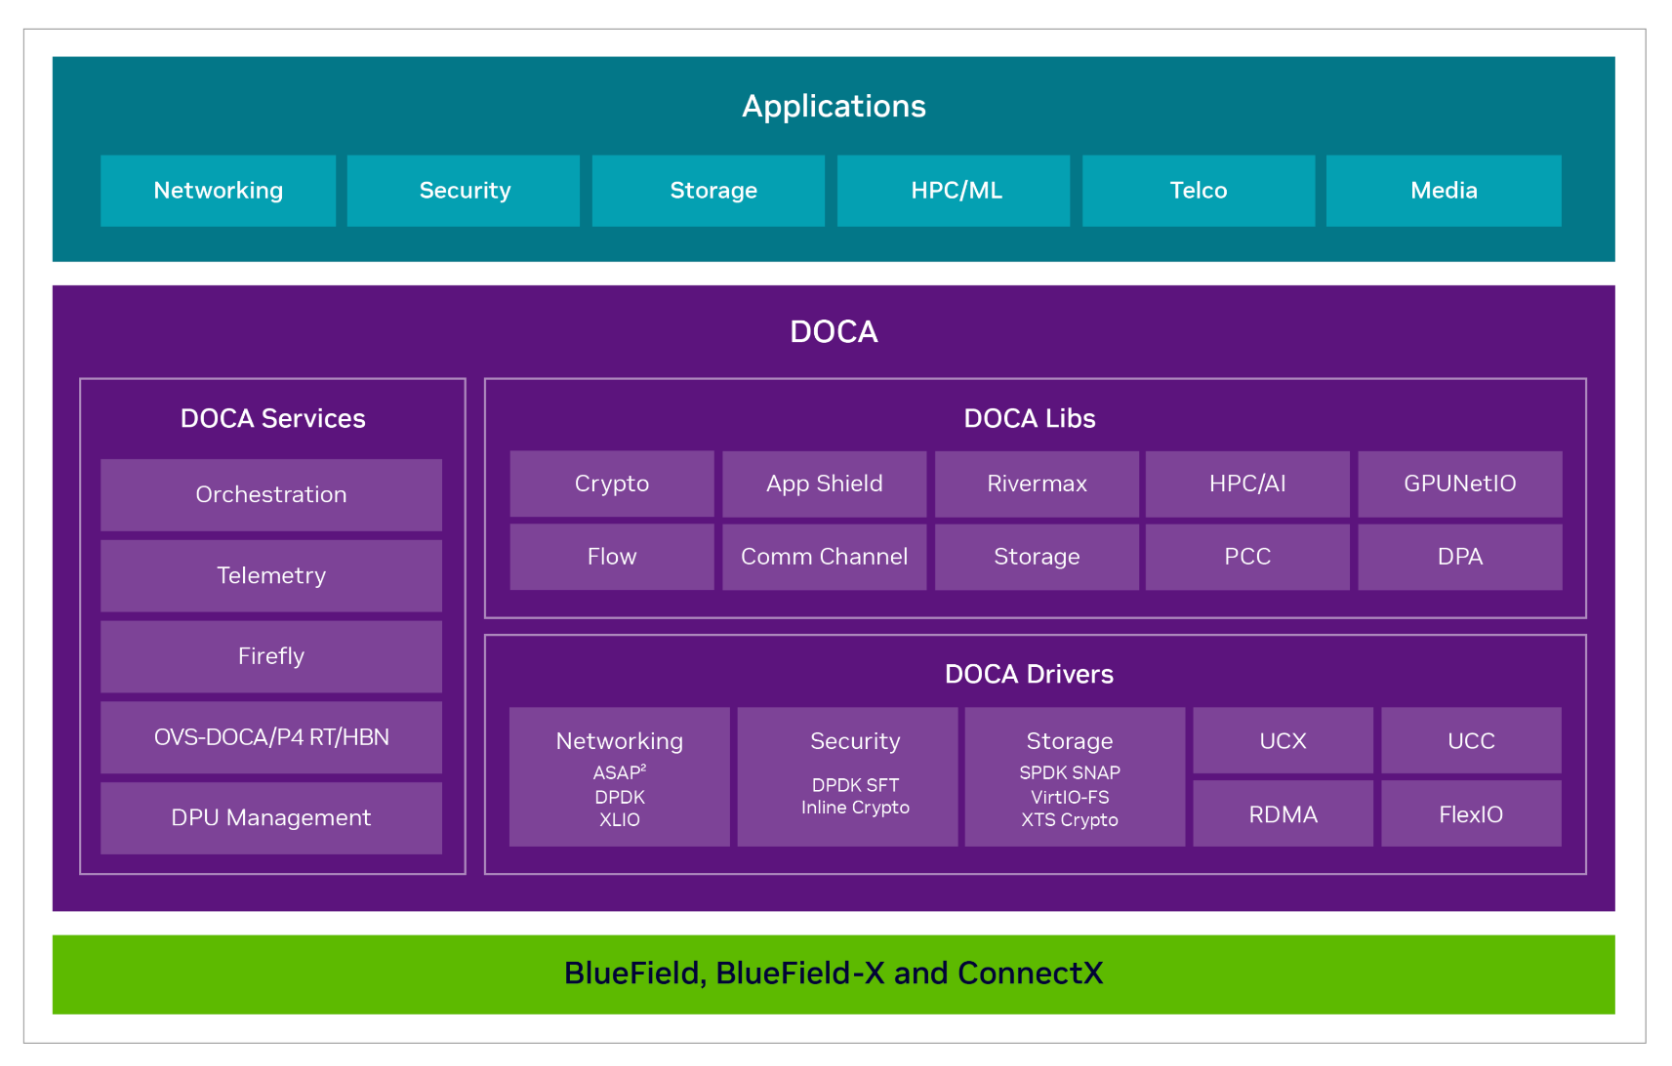 Diagram shows an application layer (including networking, security, and storage), DOCA services (including Orchestration, Telemetry, and Firefly), libraries (including Crypto, App Shield, and Rivermax), and drivers (including UCX, UCC, and RDMA).